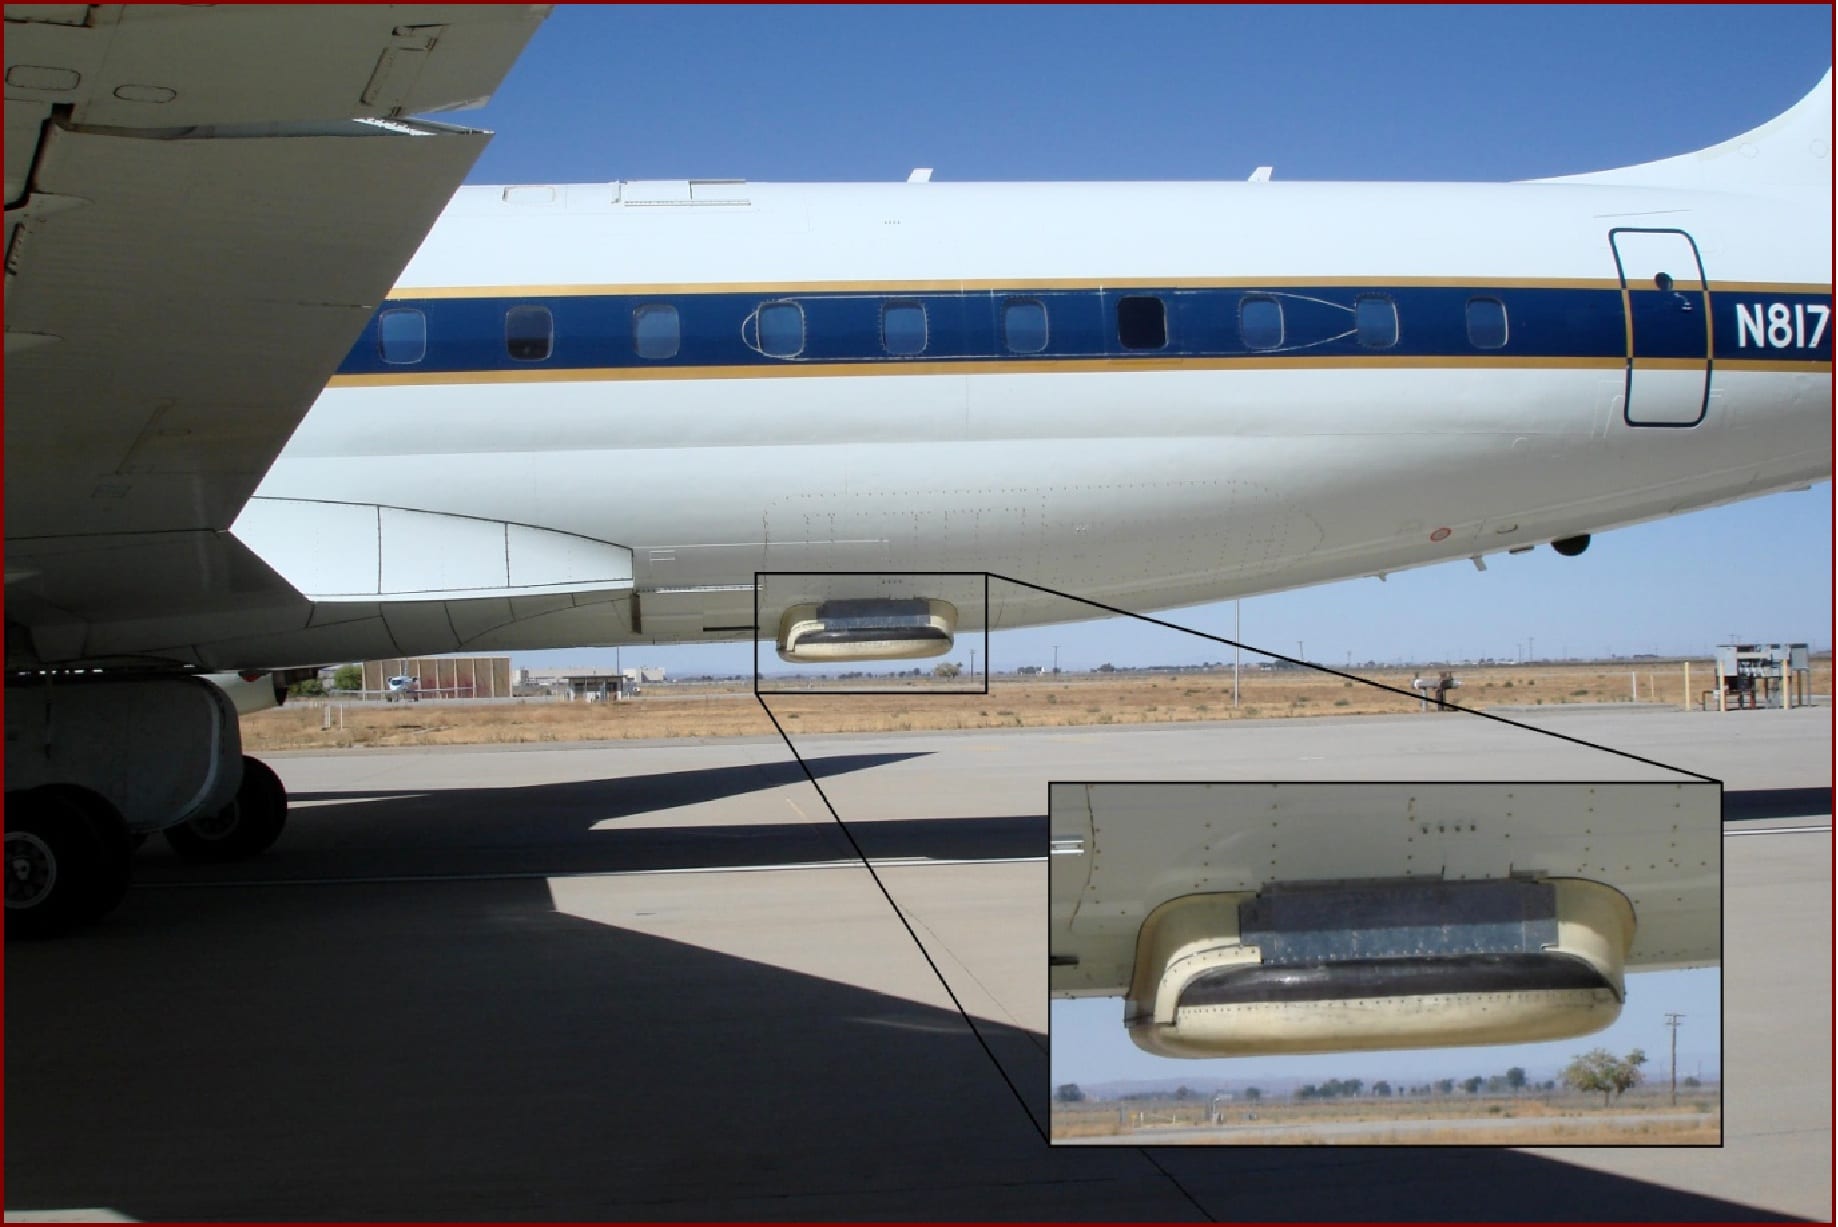 Image of The NASA DC-8 aircraft after installation of the radar package. Credit: CReSIS